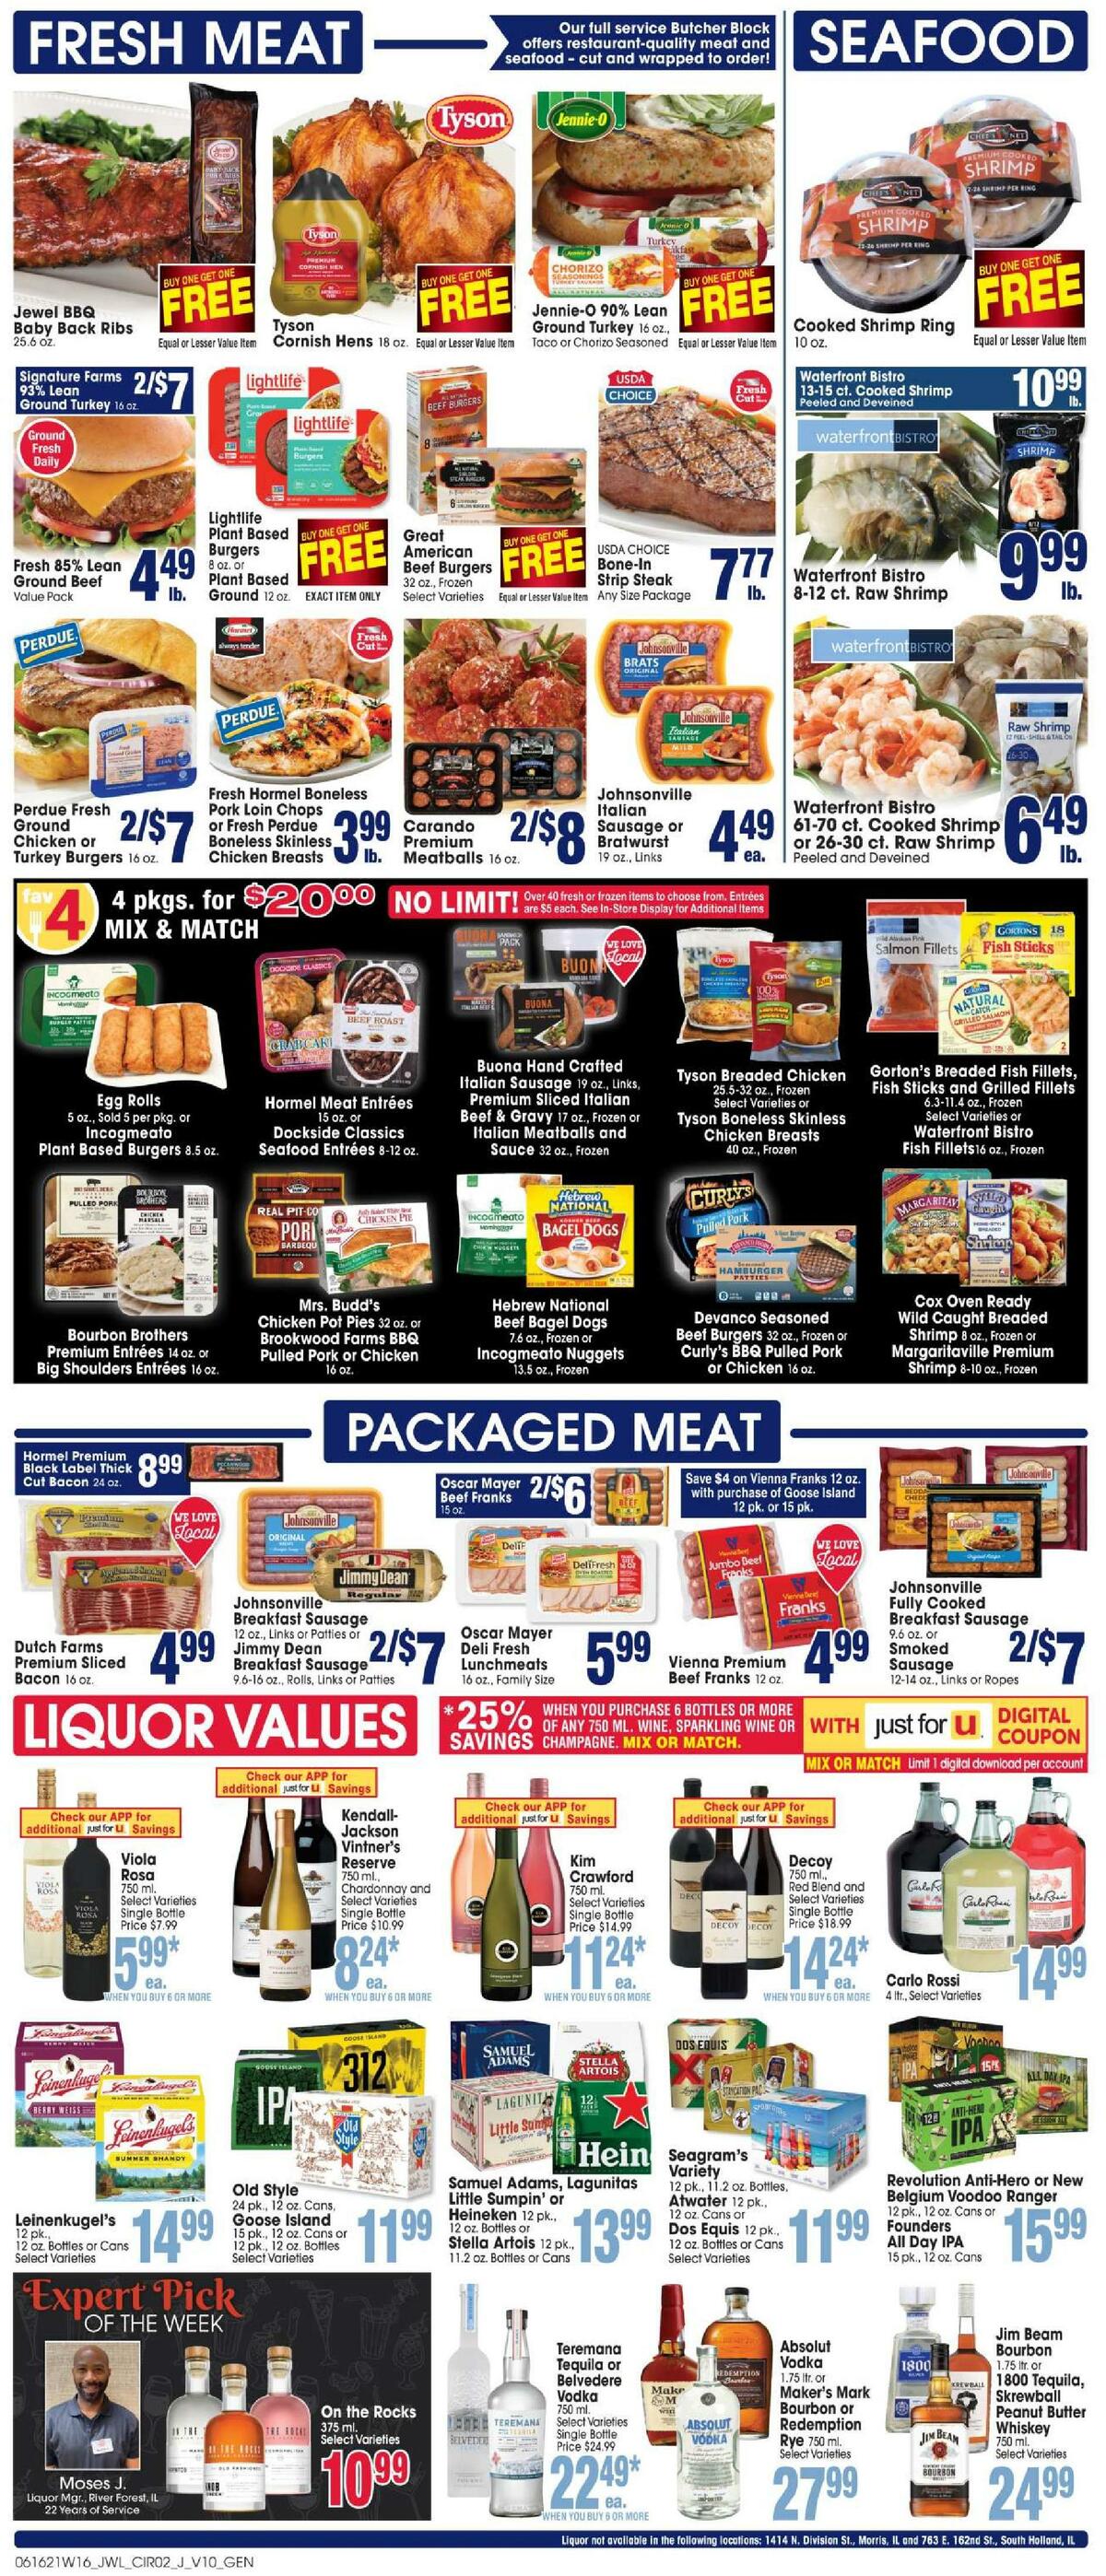 Jewel Osco Weekly Ad from June 16